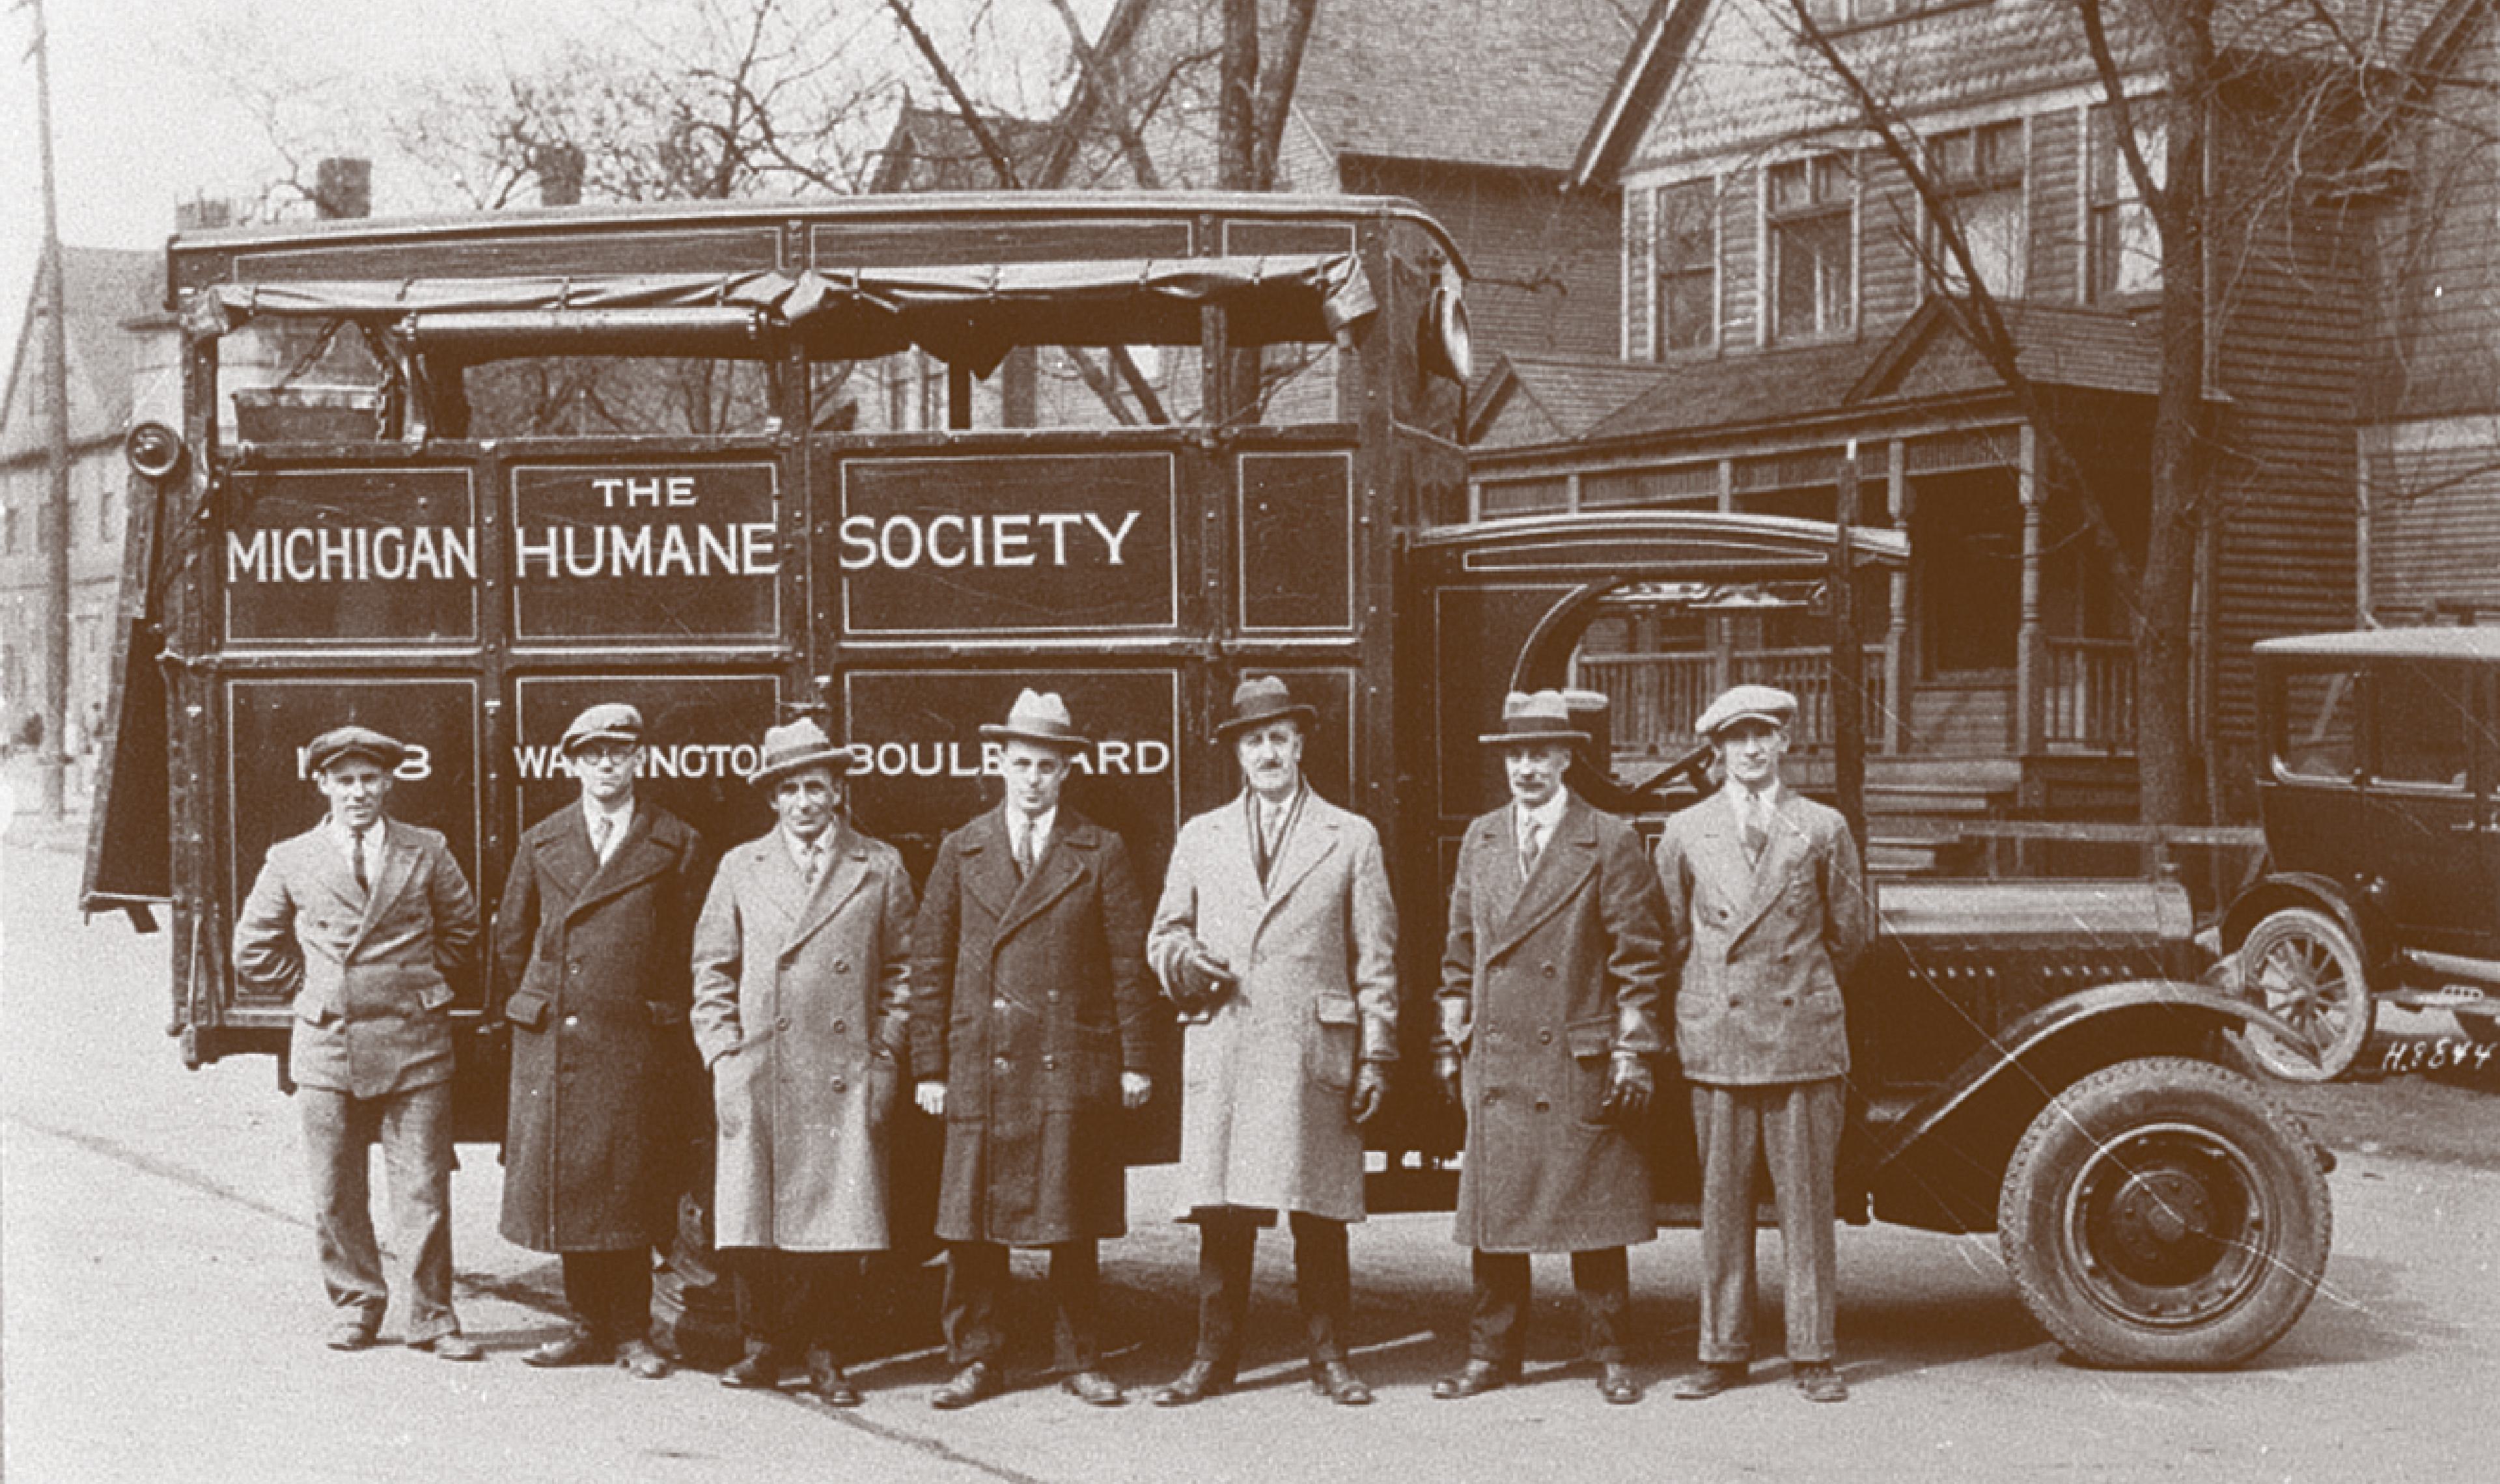 A historic sepia tone photo of the Michigan Humane early staff and their truck.